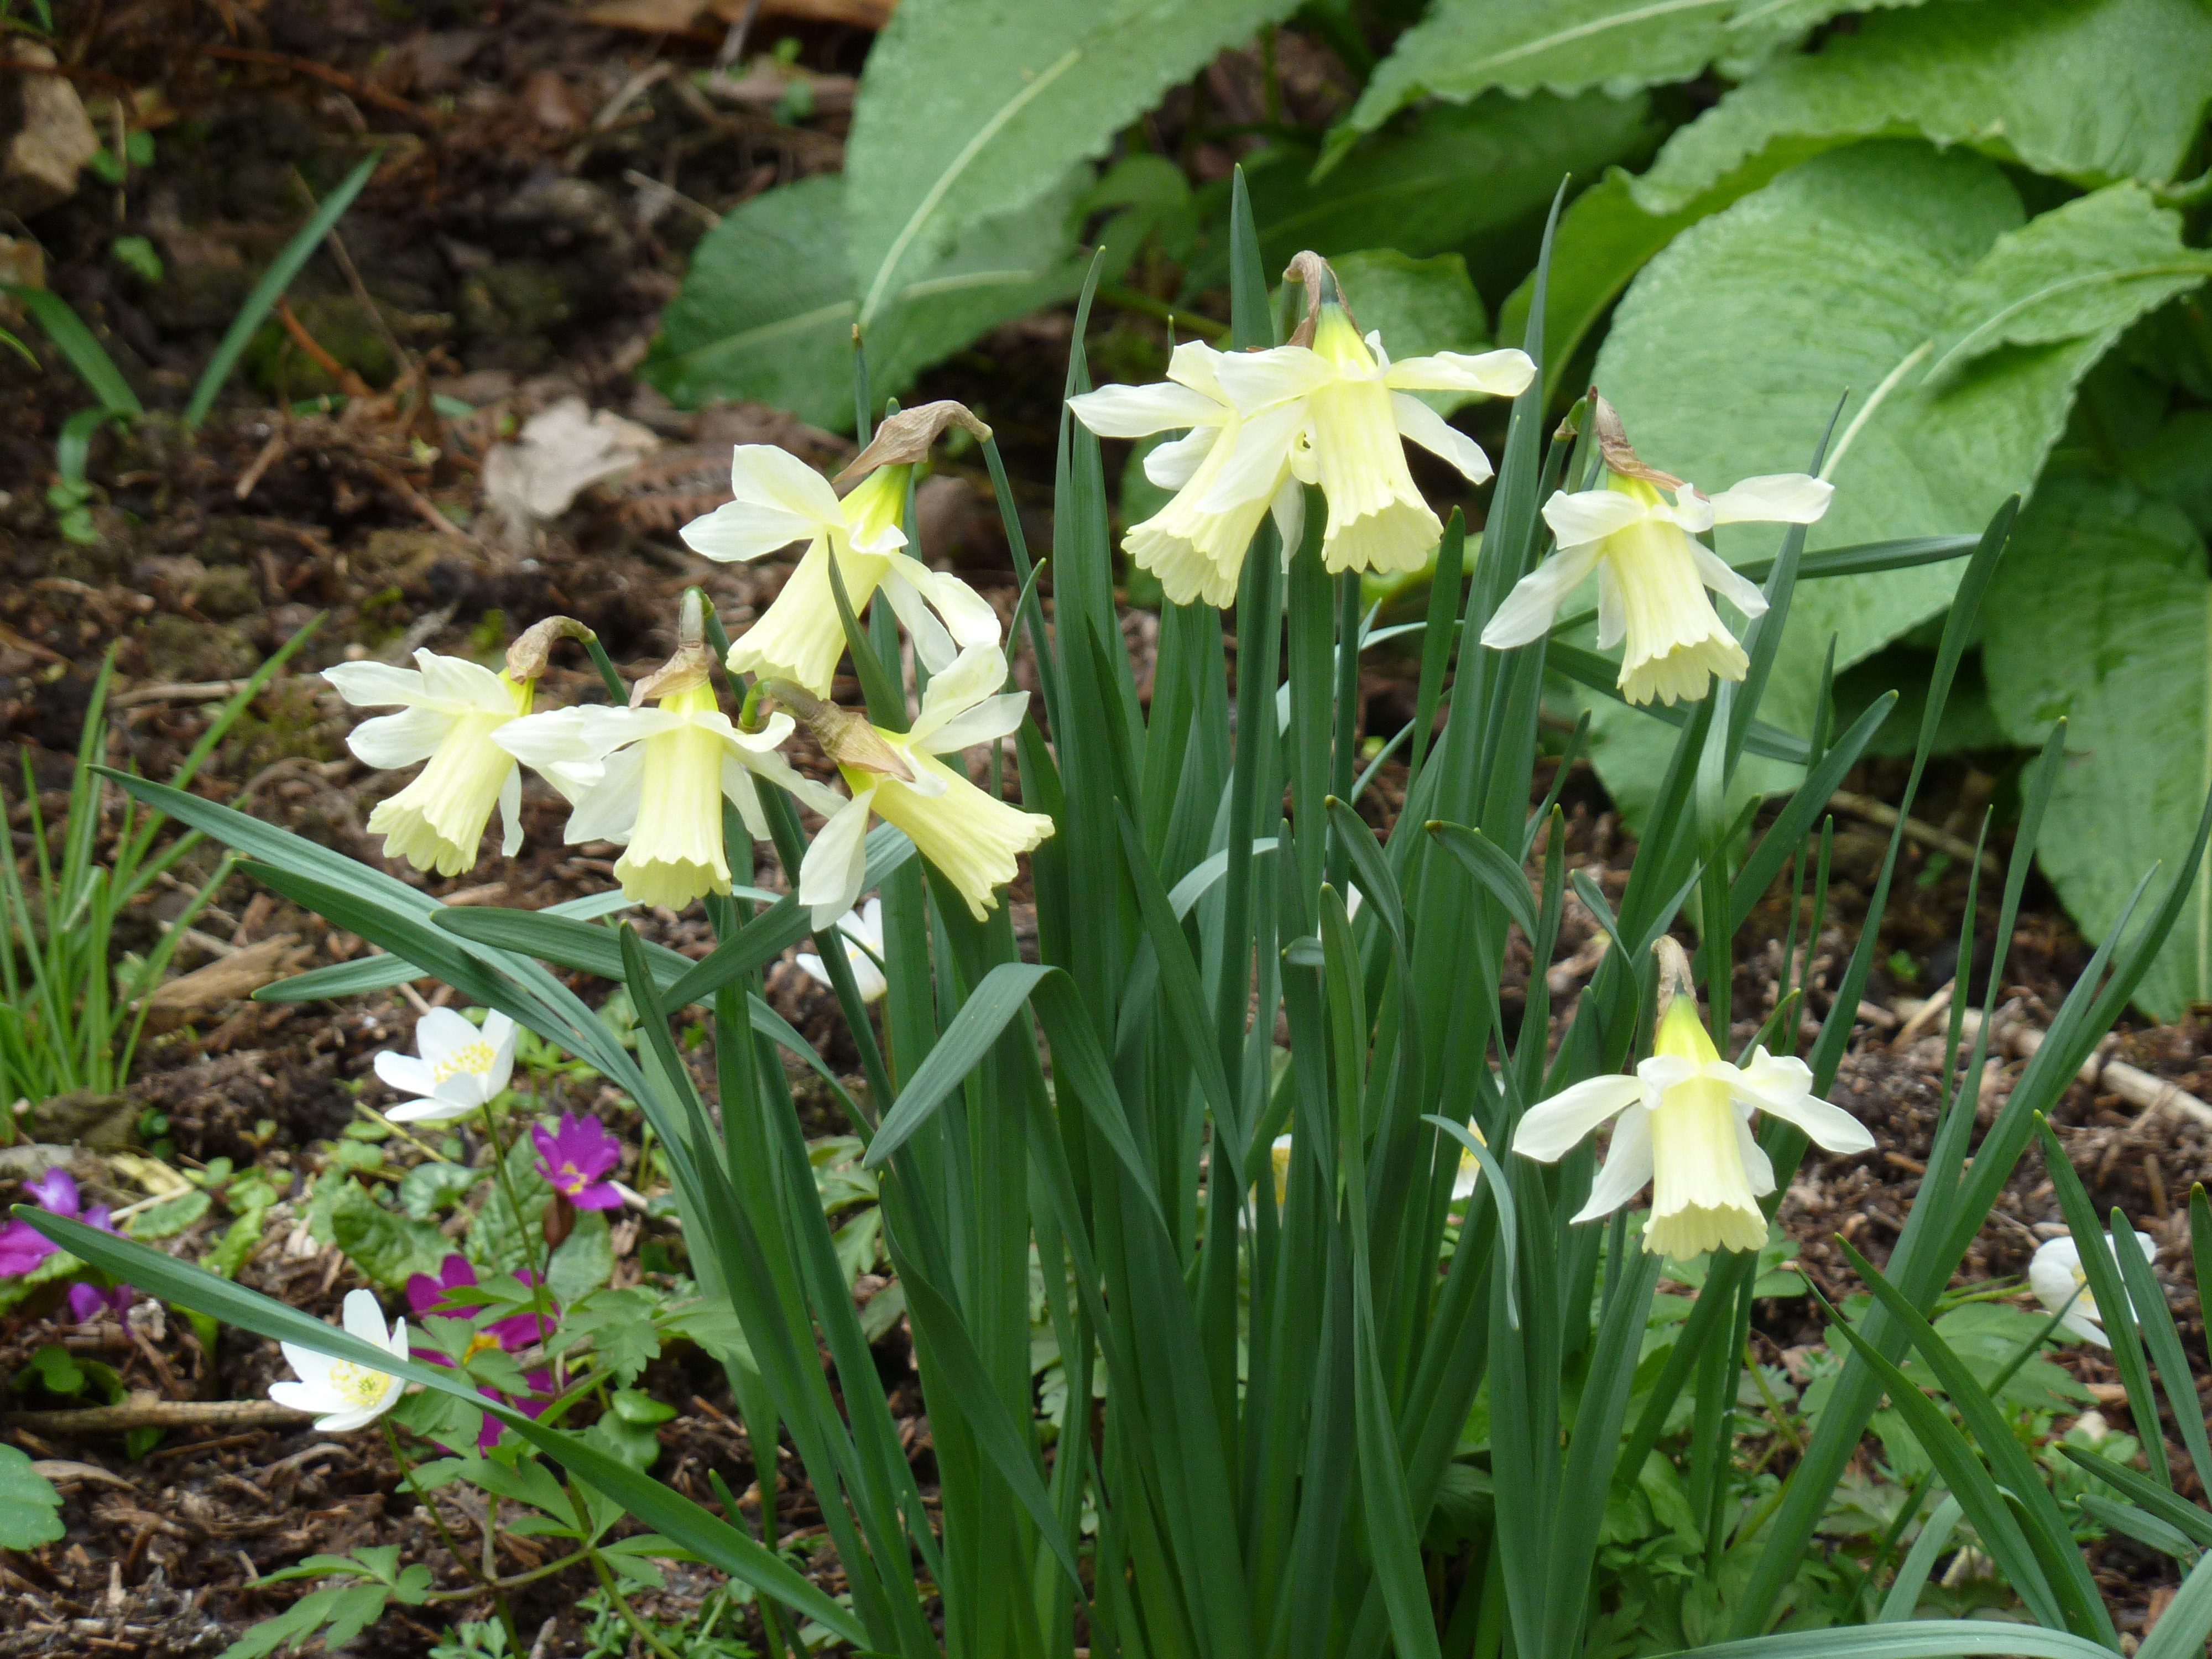 The miniature narcissus Princess Zaide, how could we forget this one 